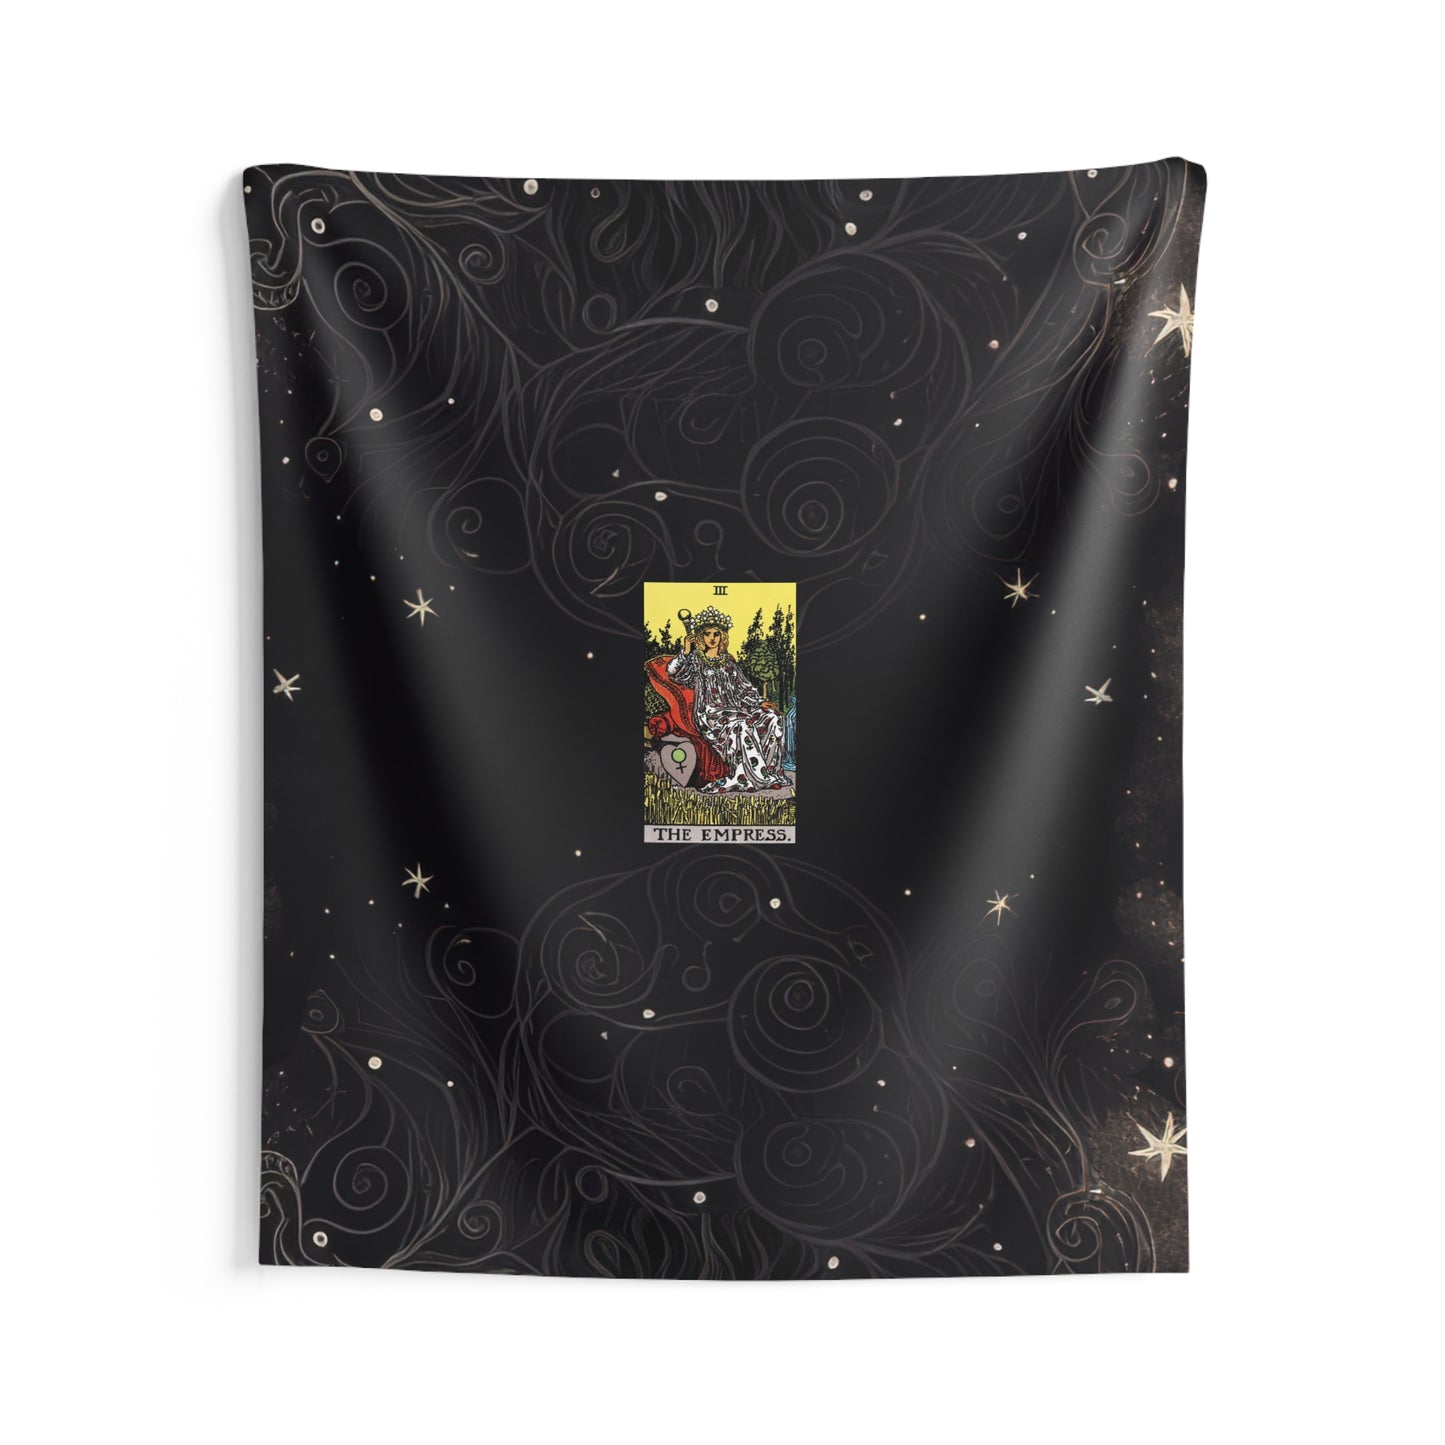 The Empress Tarot Card Altar Cloth or Tapestry with Starry Background